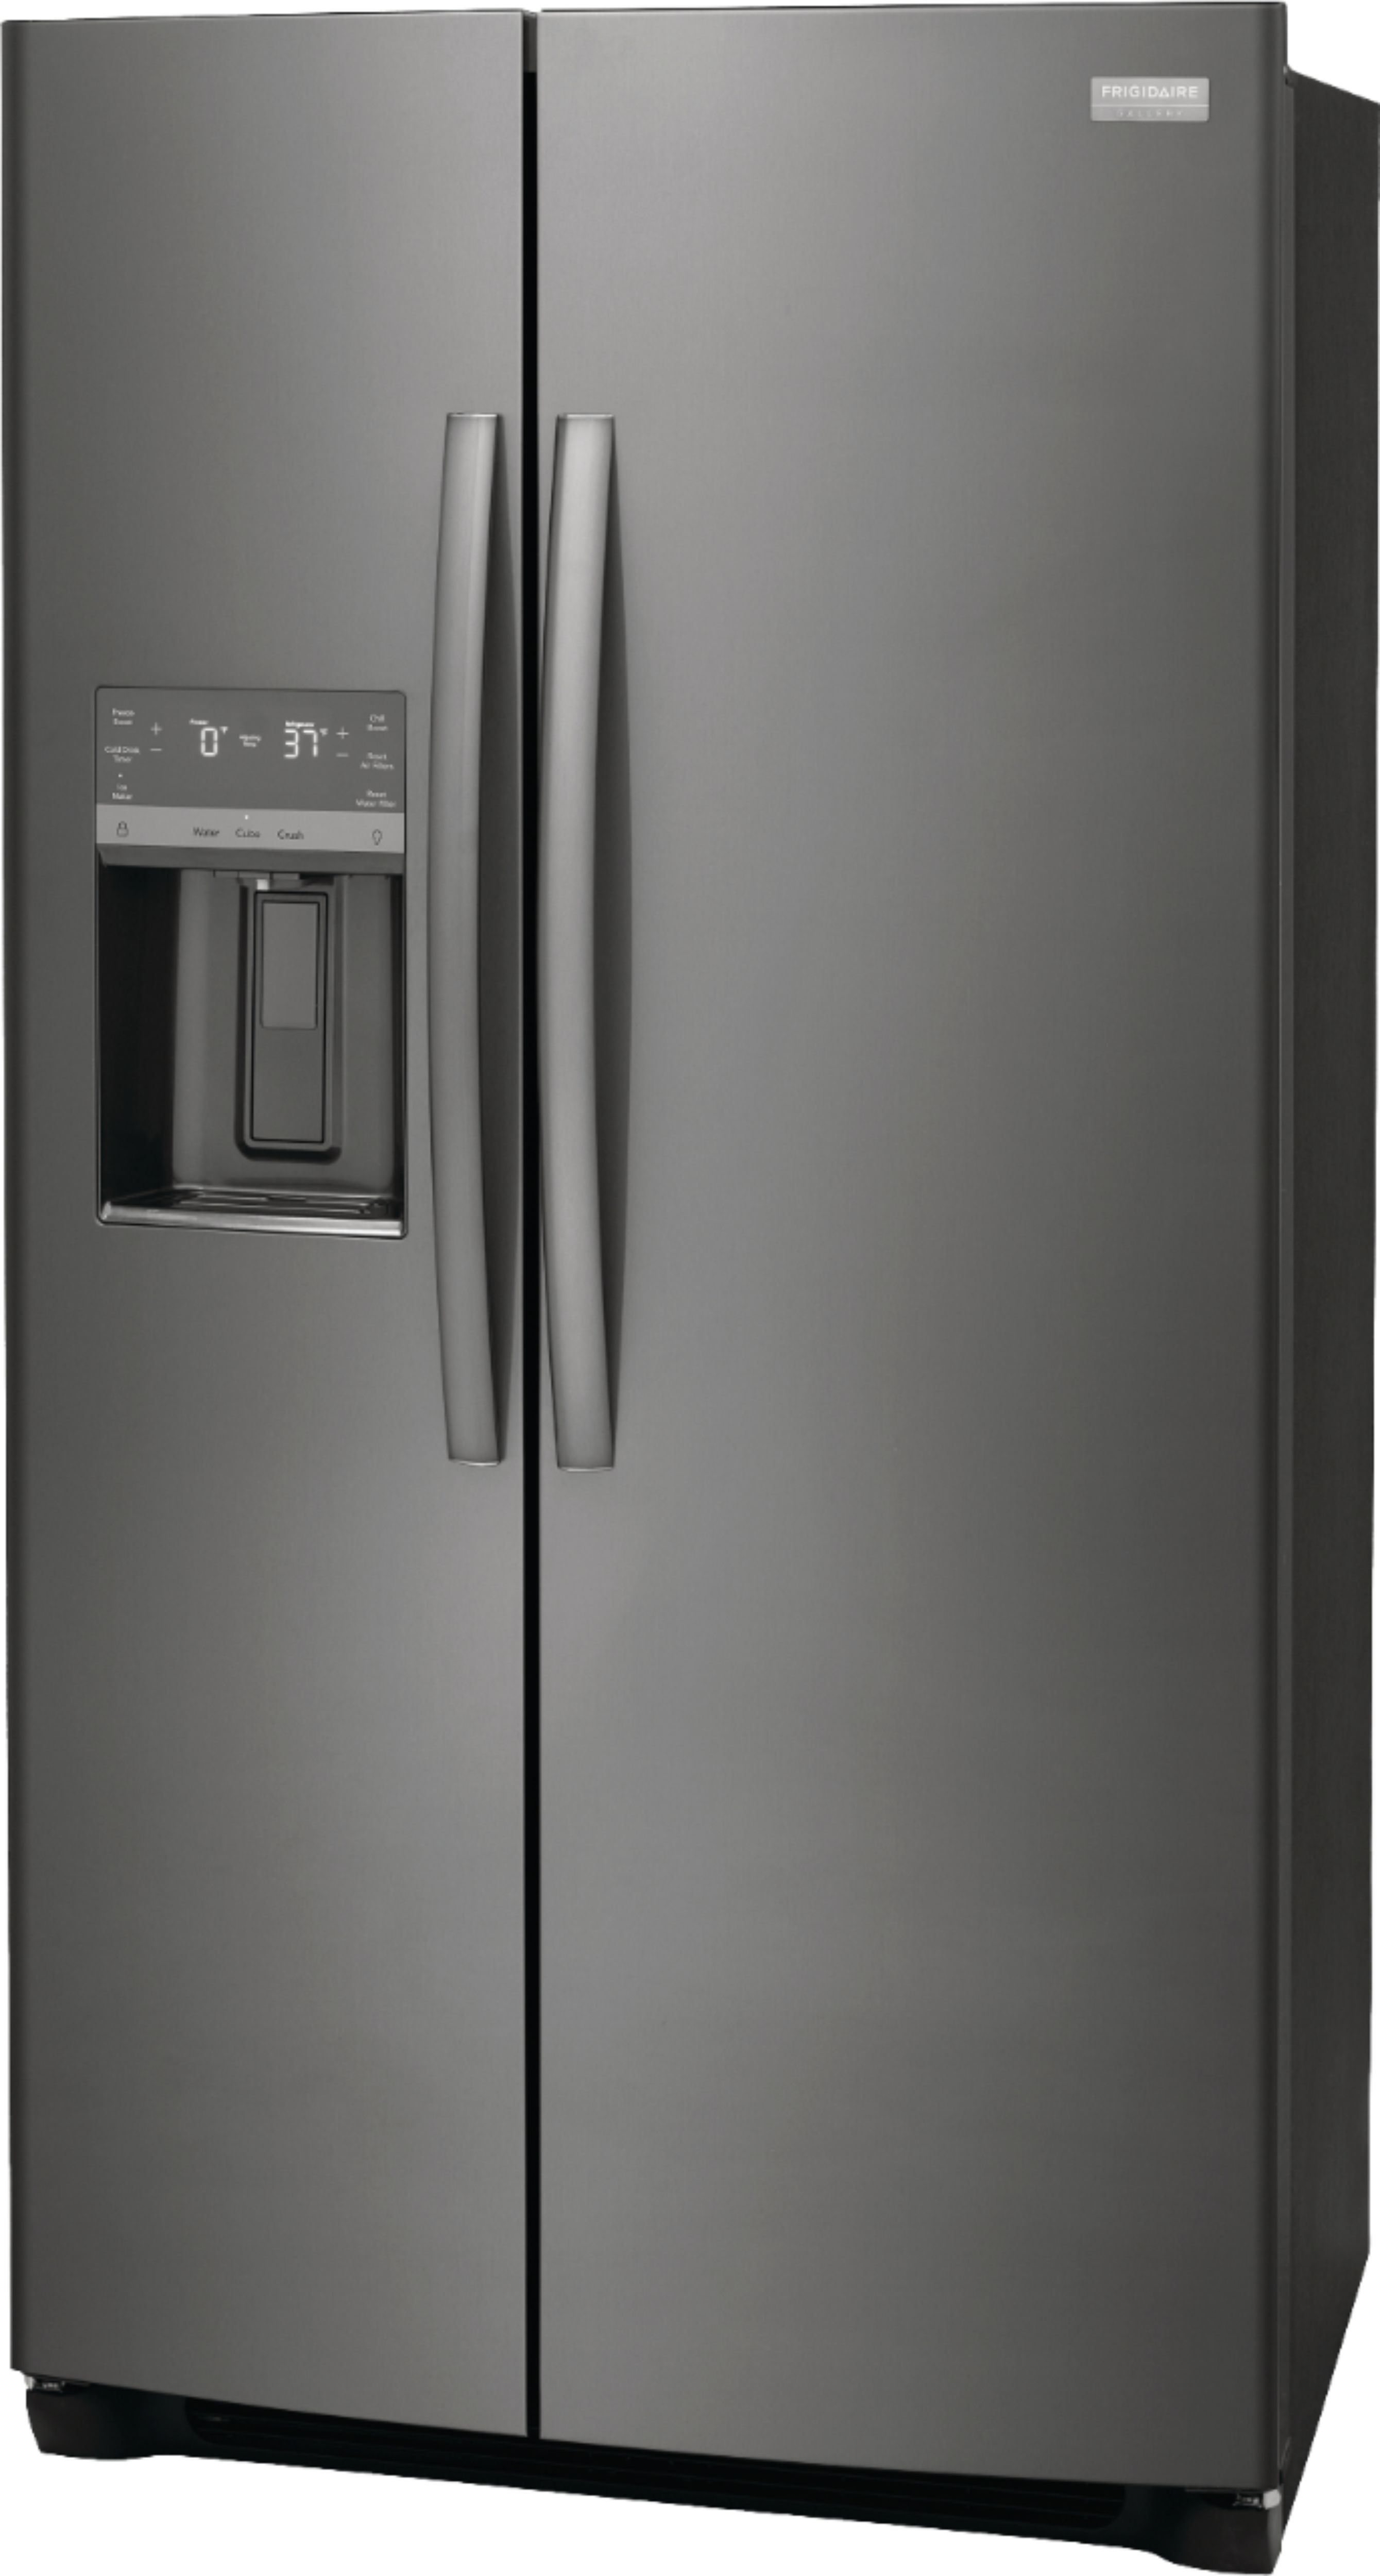 Angle View: Frigidaire - Gallery 22.3 Cu. Ft. Side-by-Side Counter-Depth Refrigerator - Black stainless steel